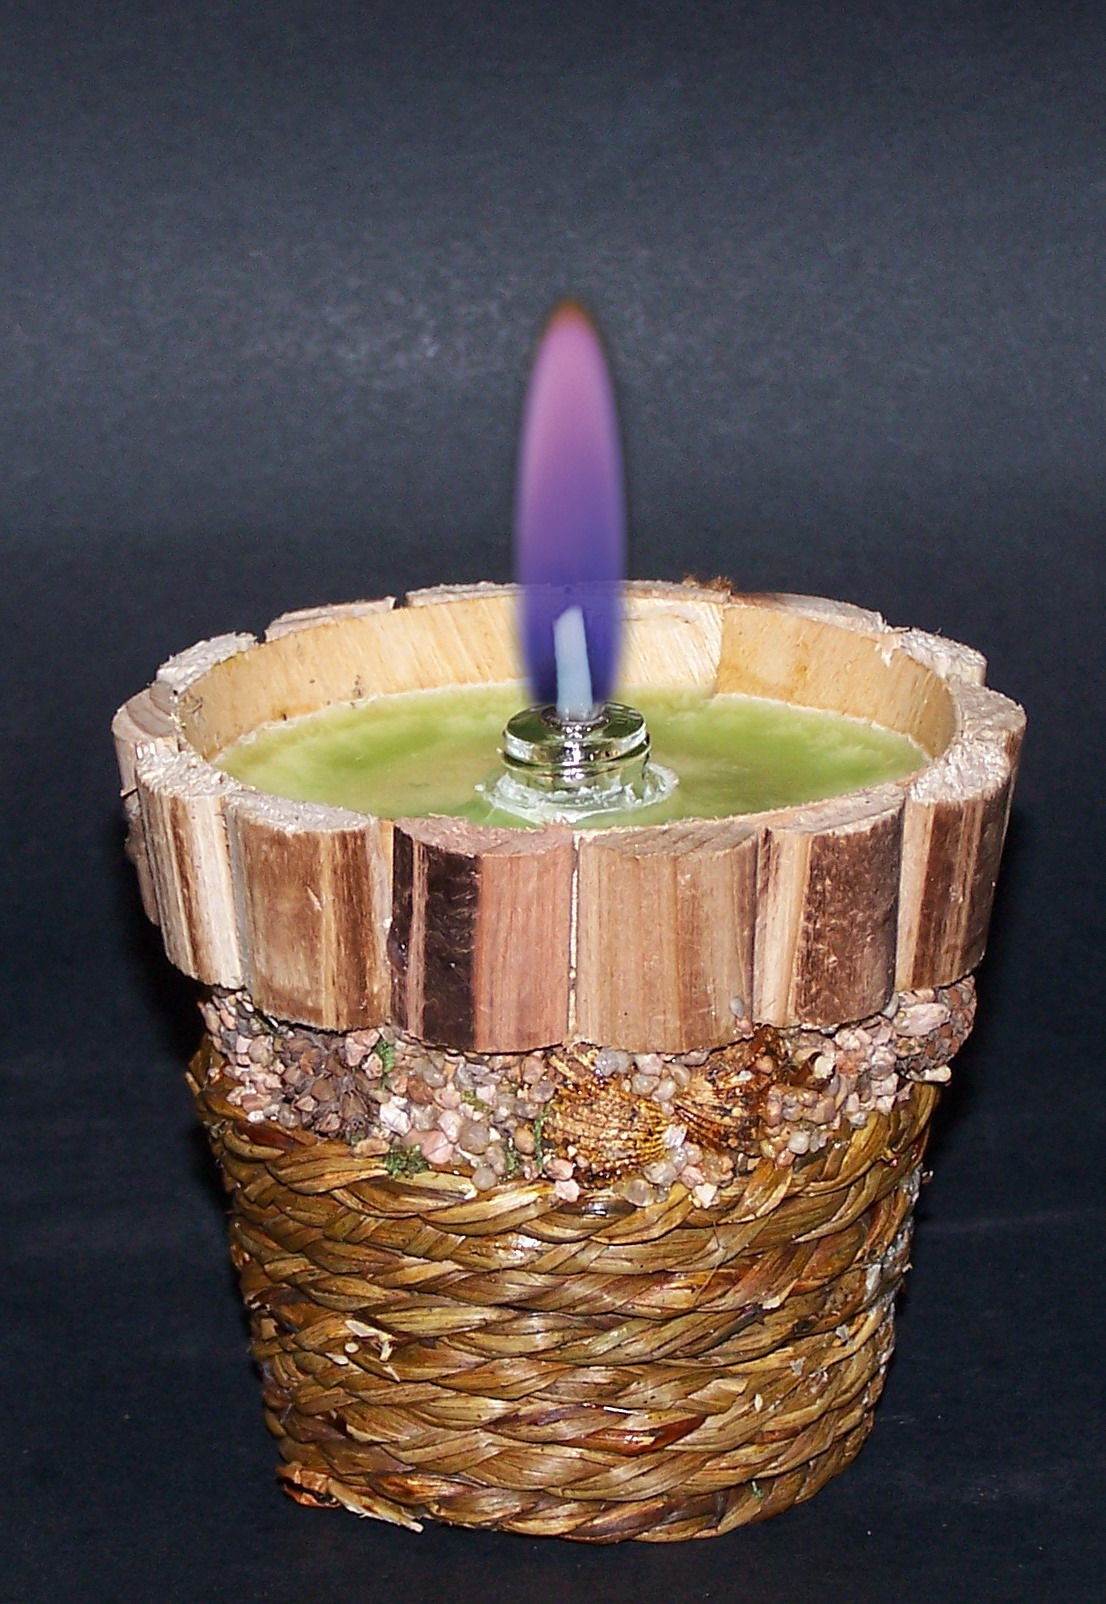 aroma candle lamp (mysterious purple flame)